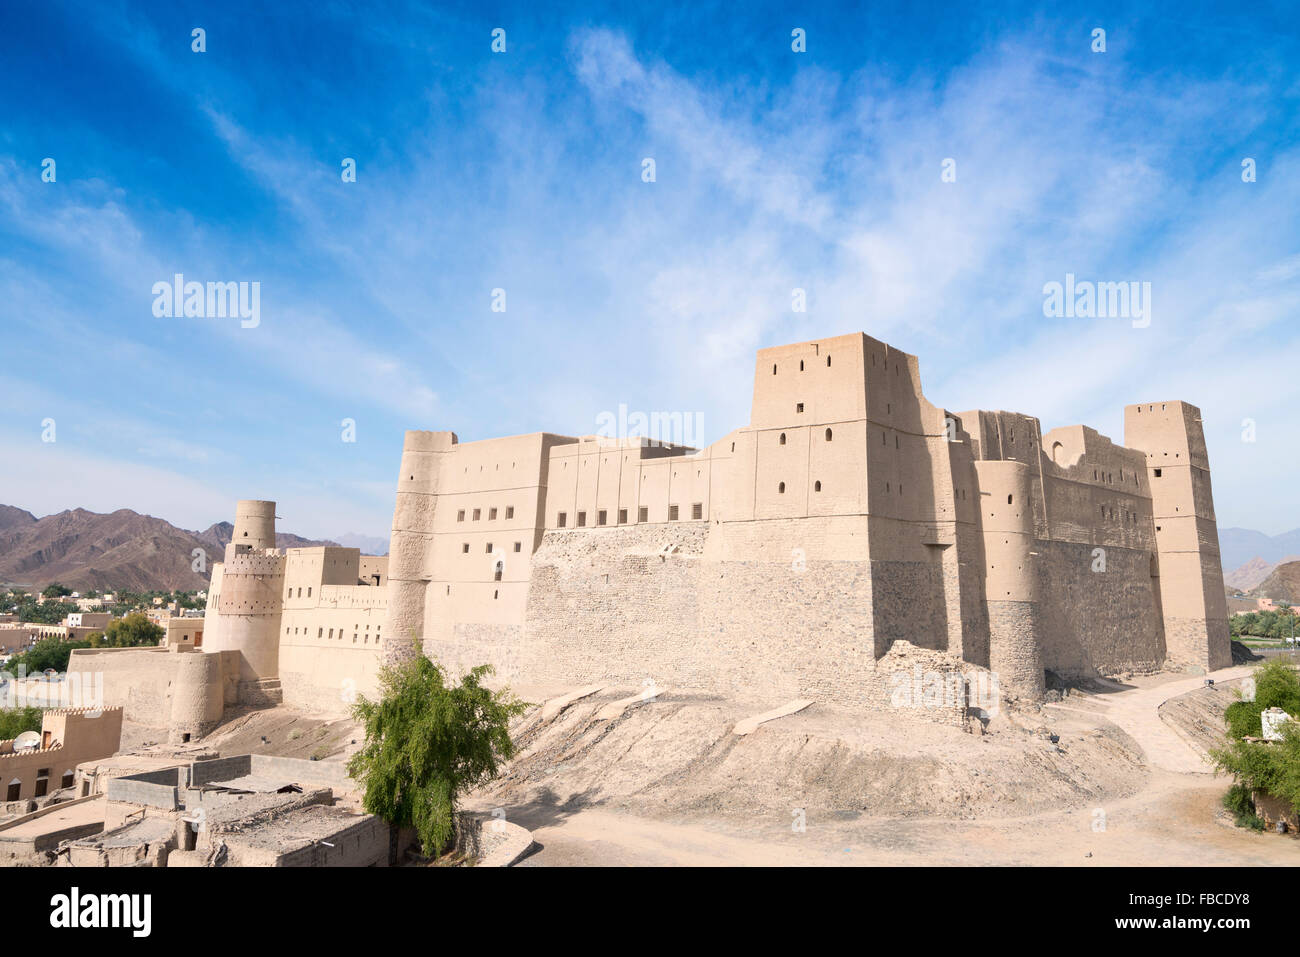 Exterior view of Bahla Fort in Oman a UNESCO World heritage Site Stock Photo